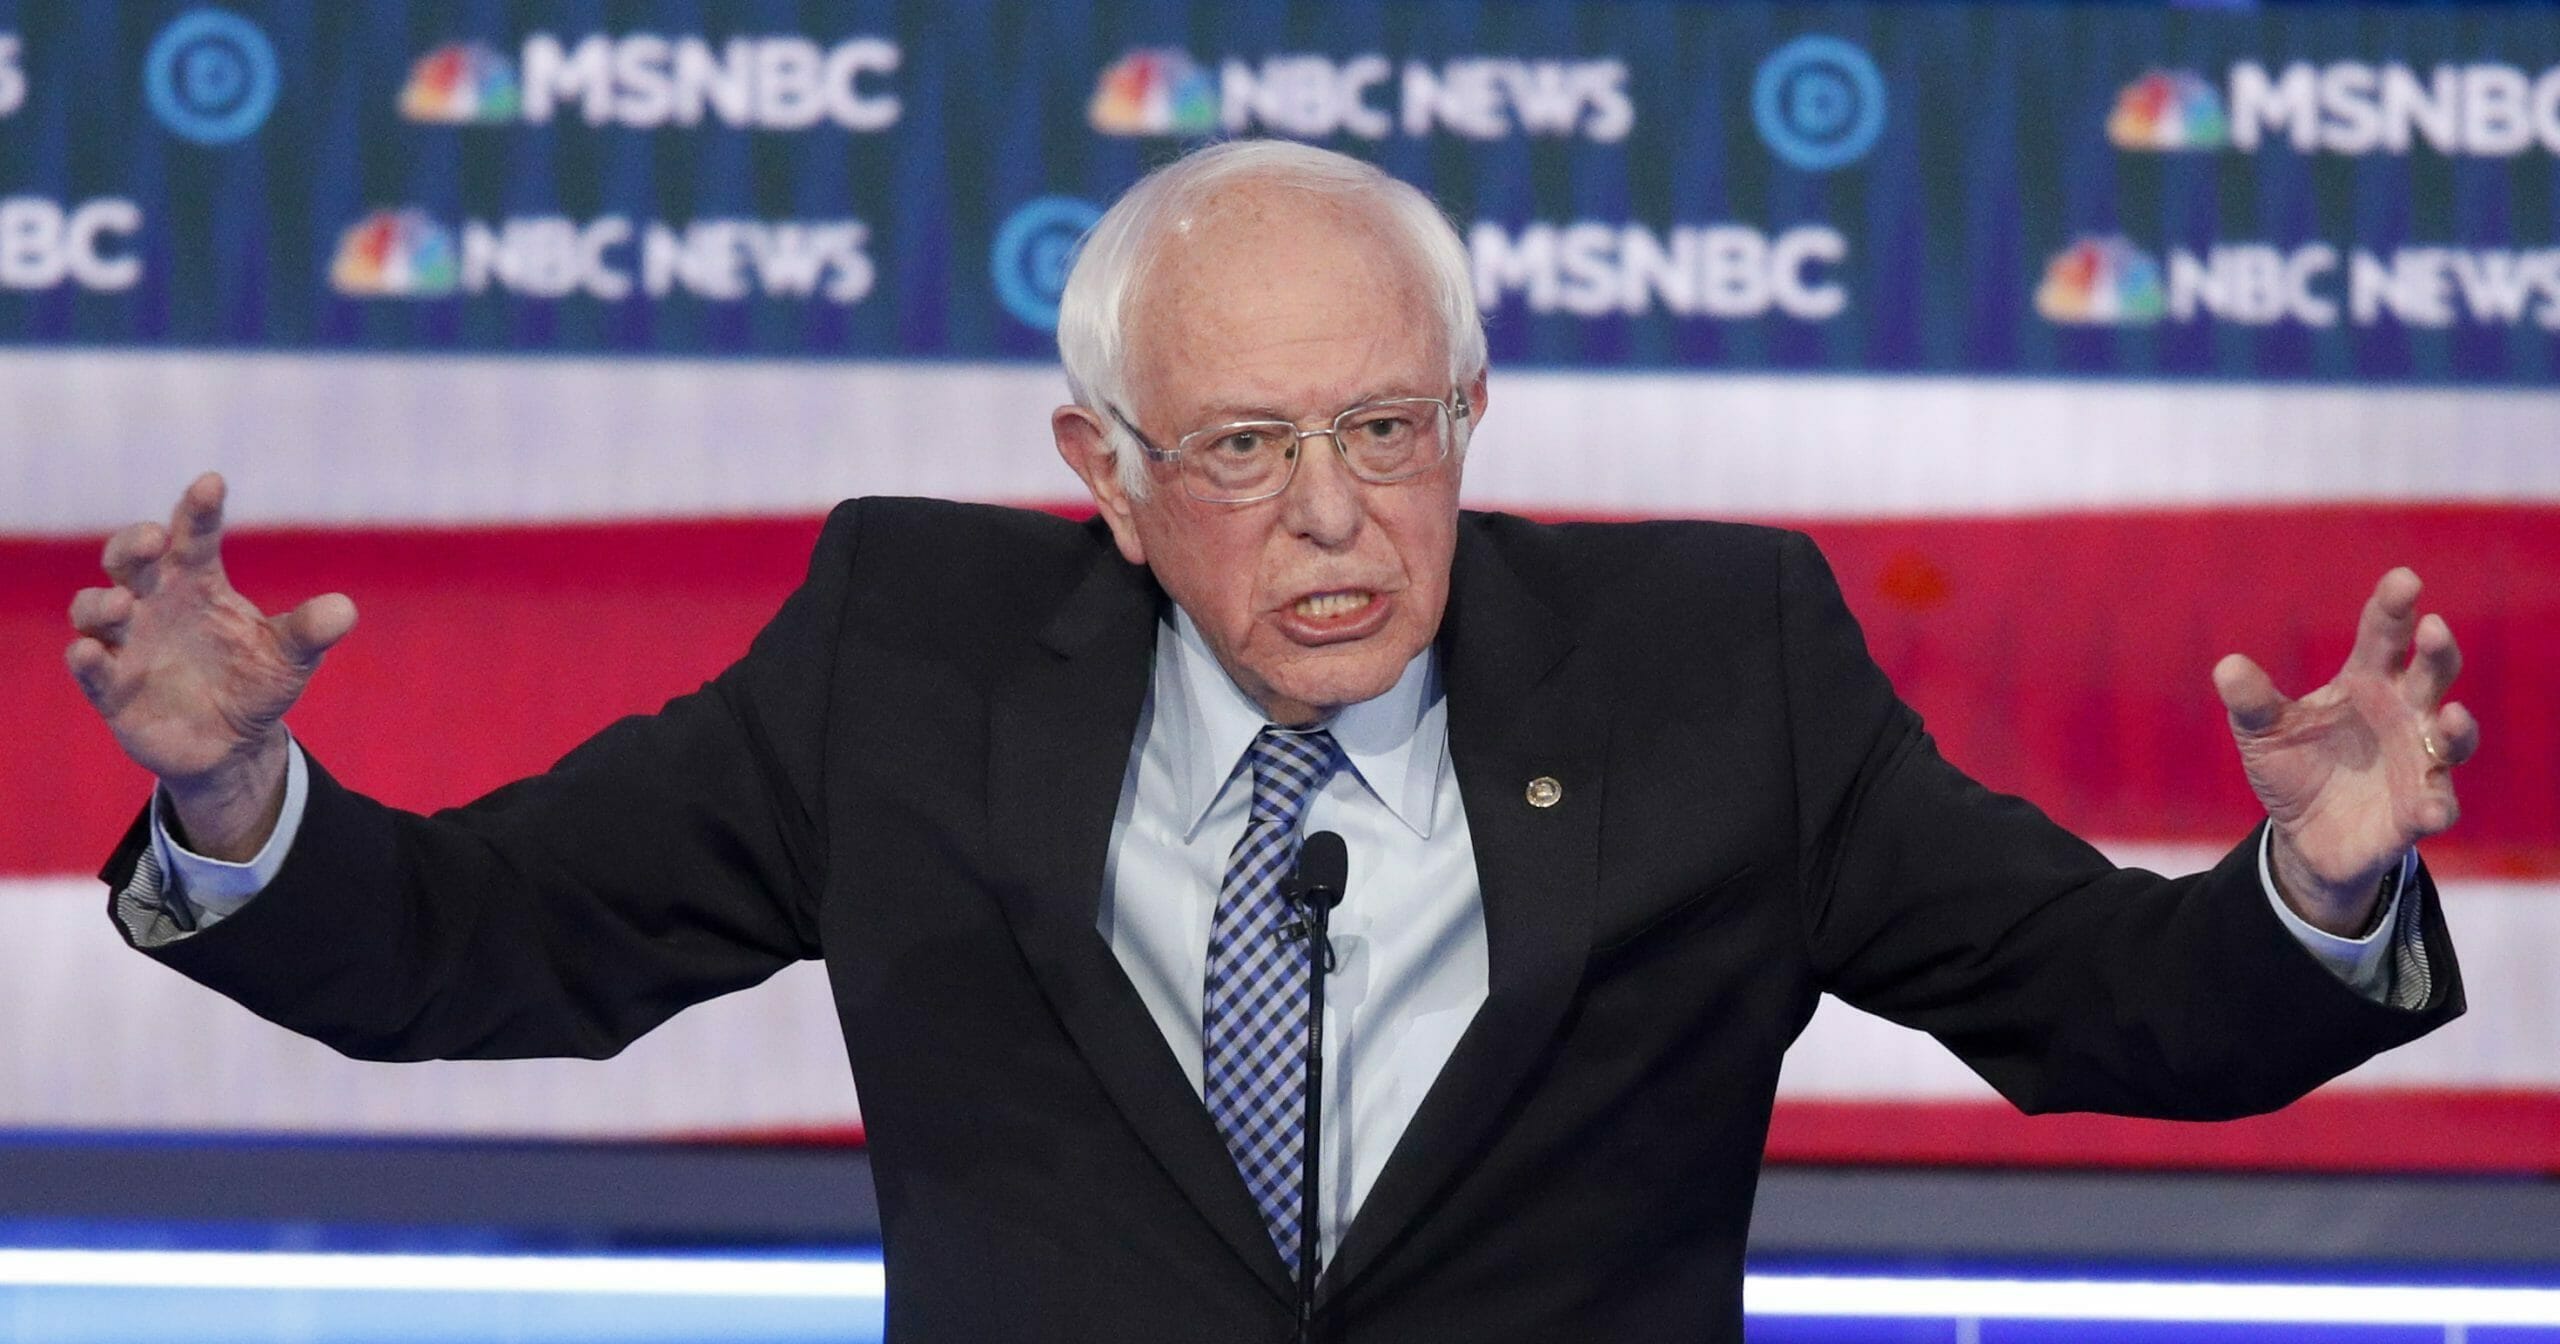 Democratic presidential candidate Sen. Bernie Sanders of Vermont speaks during a Democratic presidential primary debate on Feb. 19, 2020, in Las Vegas, hosted by NBC News and MSNBC.